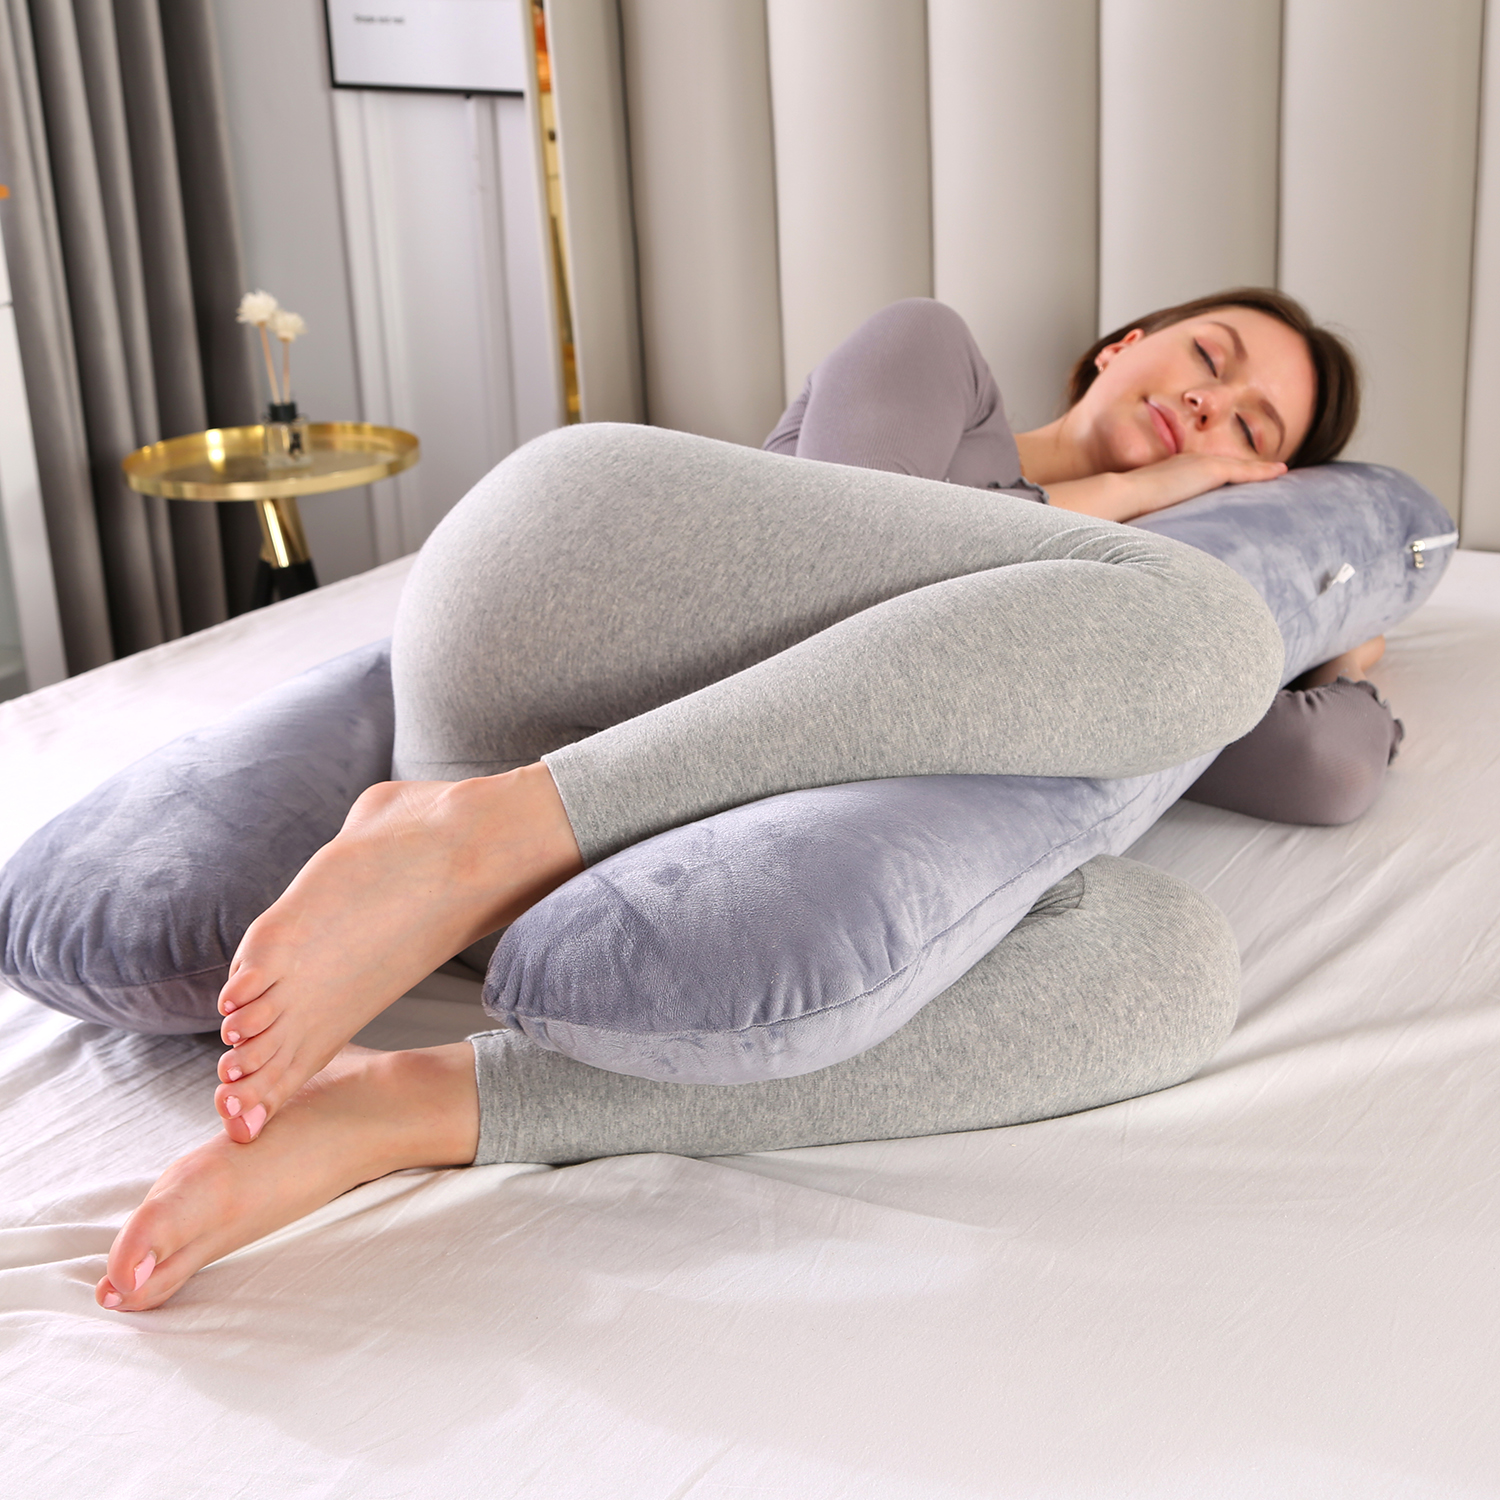 Details about   Pregnancy Pillow Maternity Belly Contoured Body U Shape Extra Comfort 60*120cm 